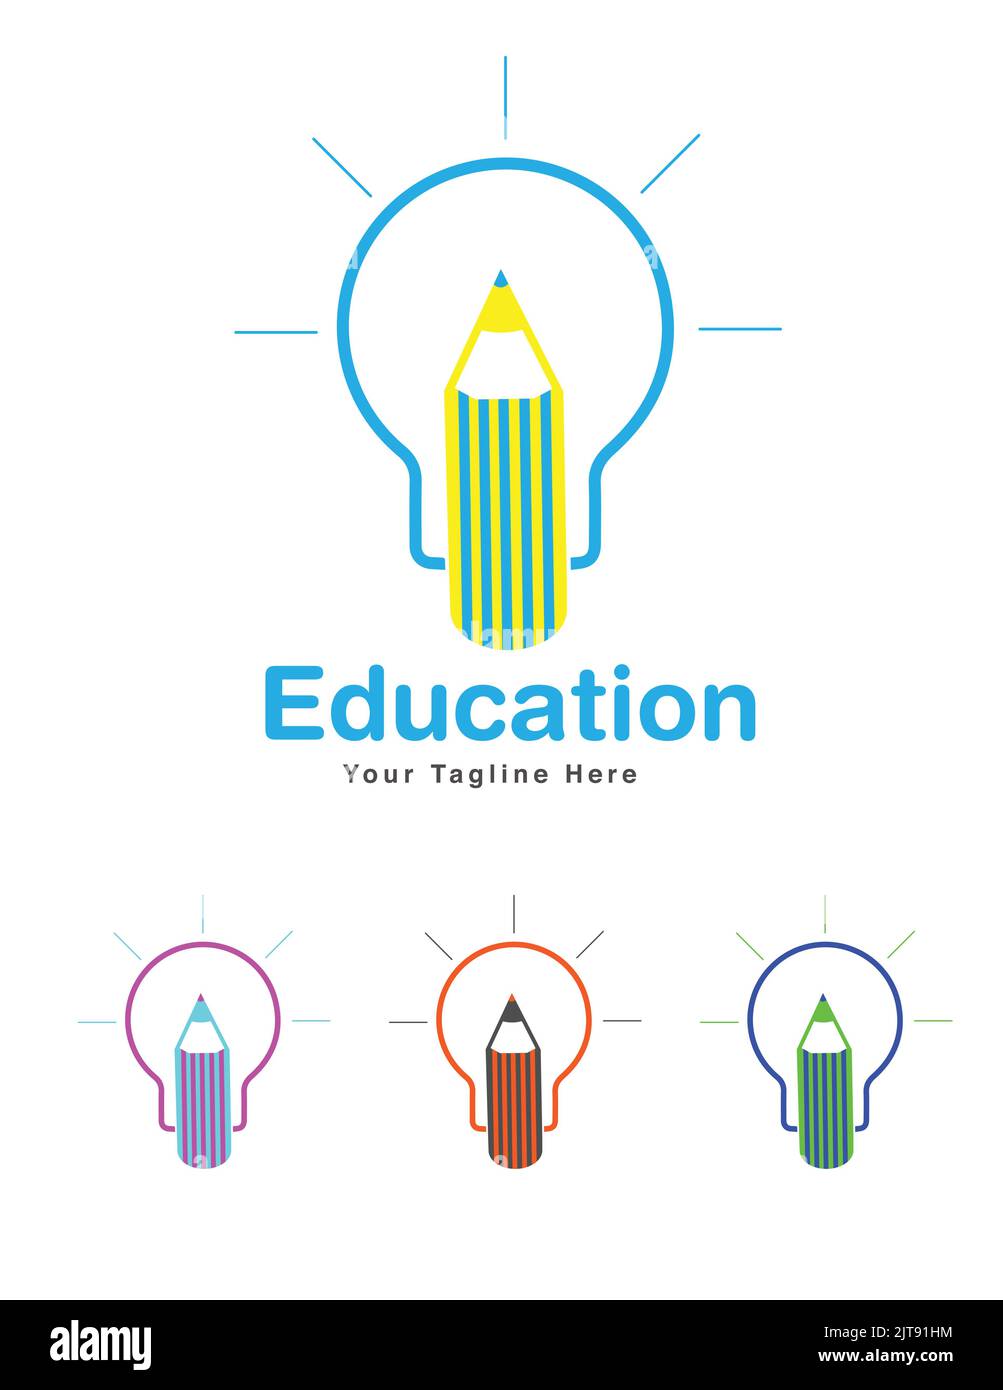 education logo with pencil and bulb shapes in four colors creative logo vector illustration Stock Vector